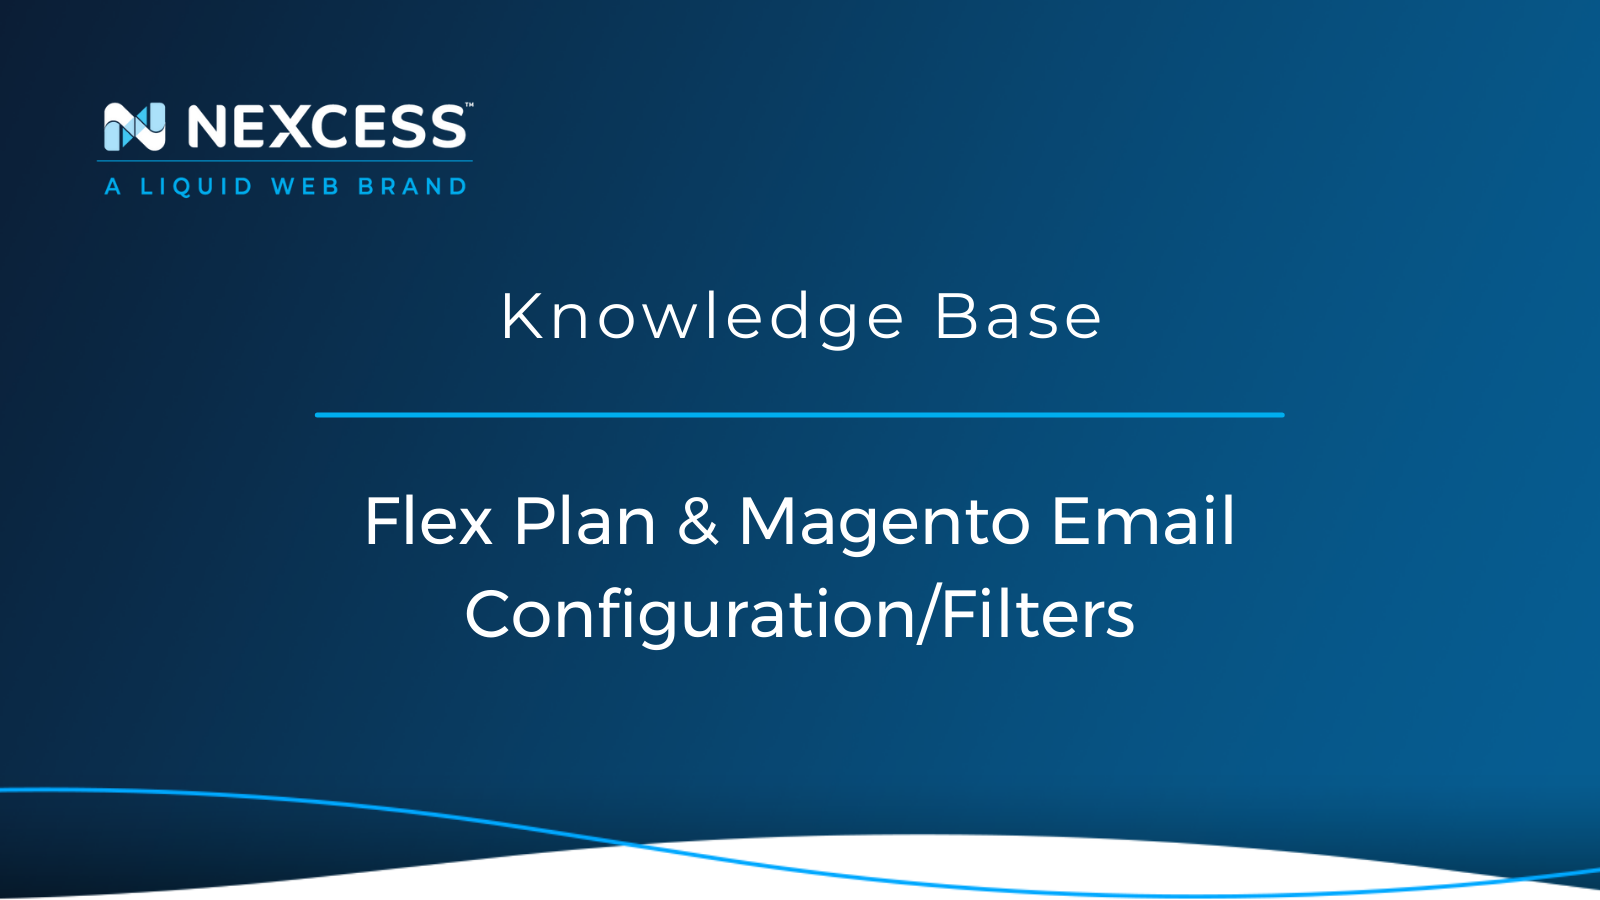 Flex Plan & Magento Email Configuration/Filters